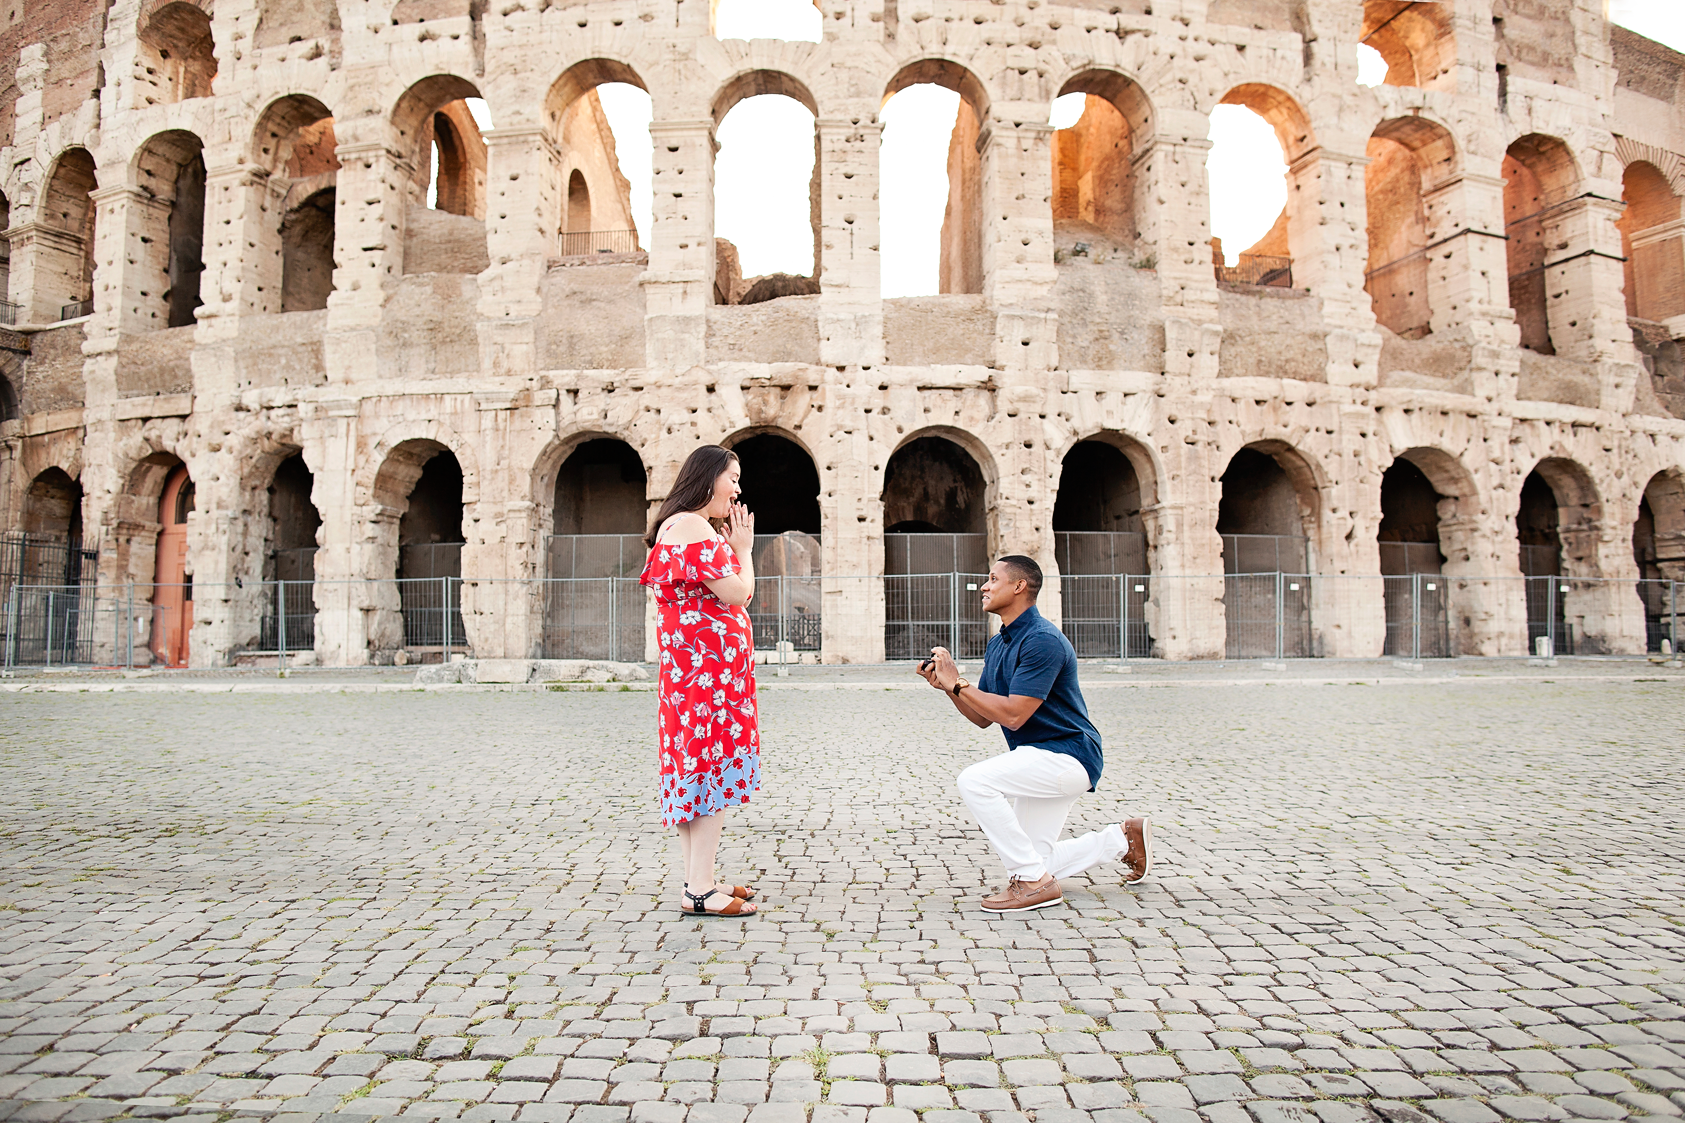 Honeymoon, vacation, family, engagement, maternity, wedding, love story individual and solo photoshoots in Rome, Italy by photographer Tricia Anne Photography | Rome Photographer, vacation, tripadvisor, instagram, fun, married, bride, groom, love, story, photography, session, photoshoot, wedding photographer, mywed, vacation photographer, engagement photo, honeymoon photoshoot, rome honeymoon, rome wedding, elopement in Rome, honeymoon photographer rome, Family Photo shoot Rome, Rome Engagement Photography, Rome Engagement Photographer, Colosseum Photo shoot, Colosseum Photography, surprise proposal rome